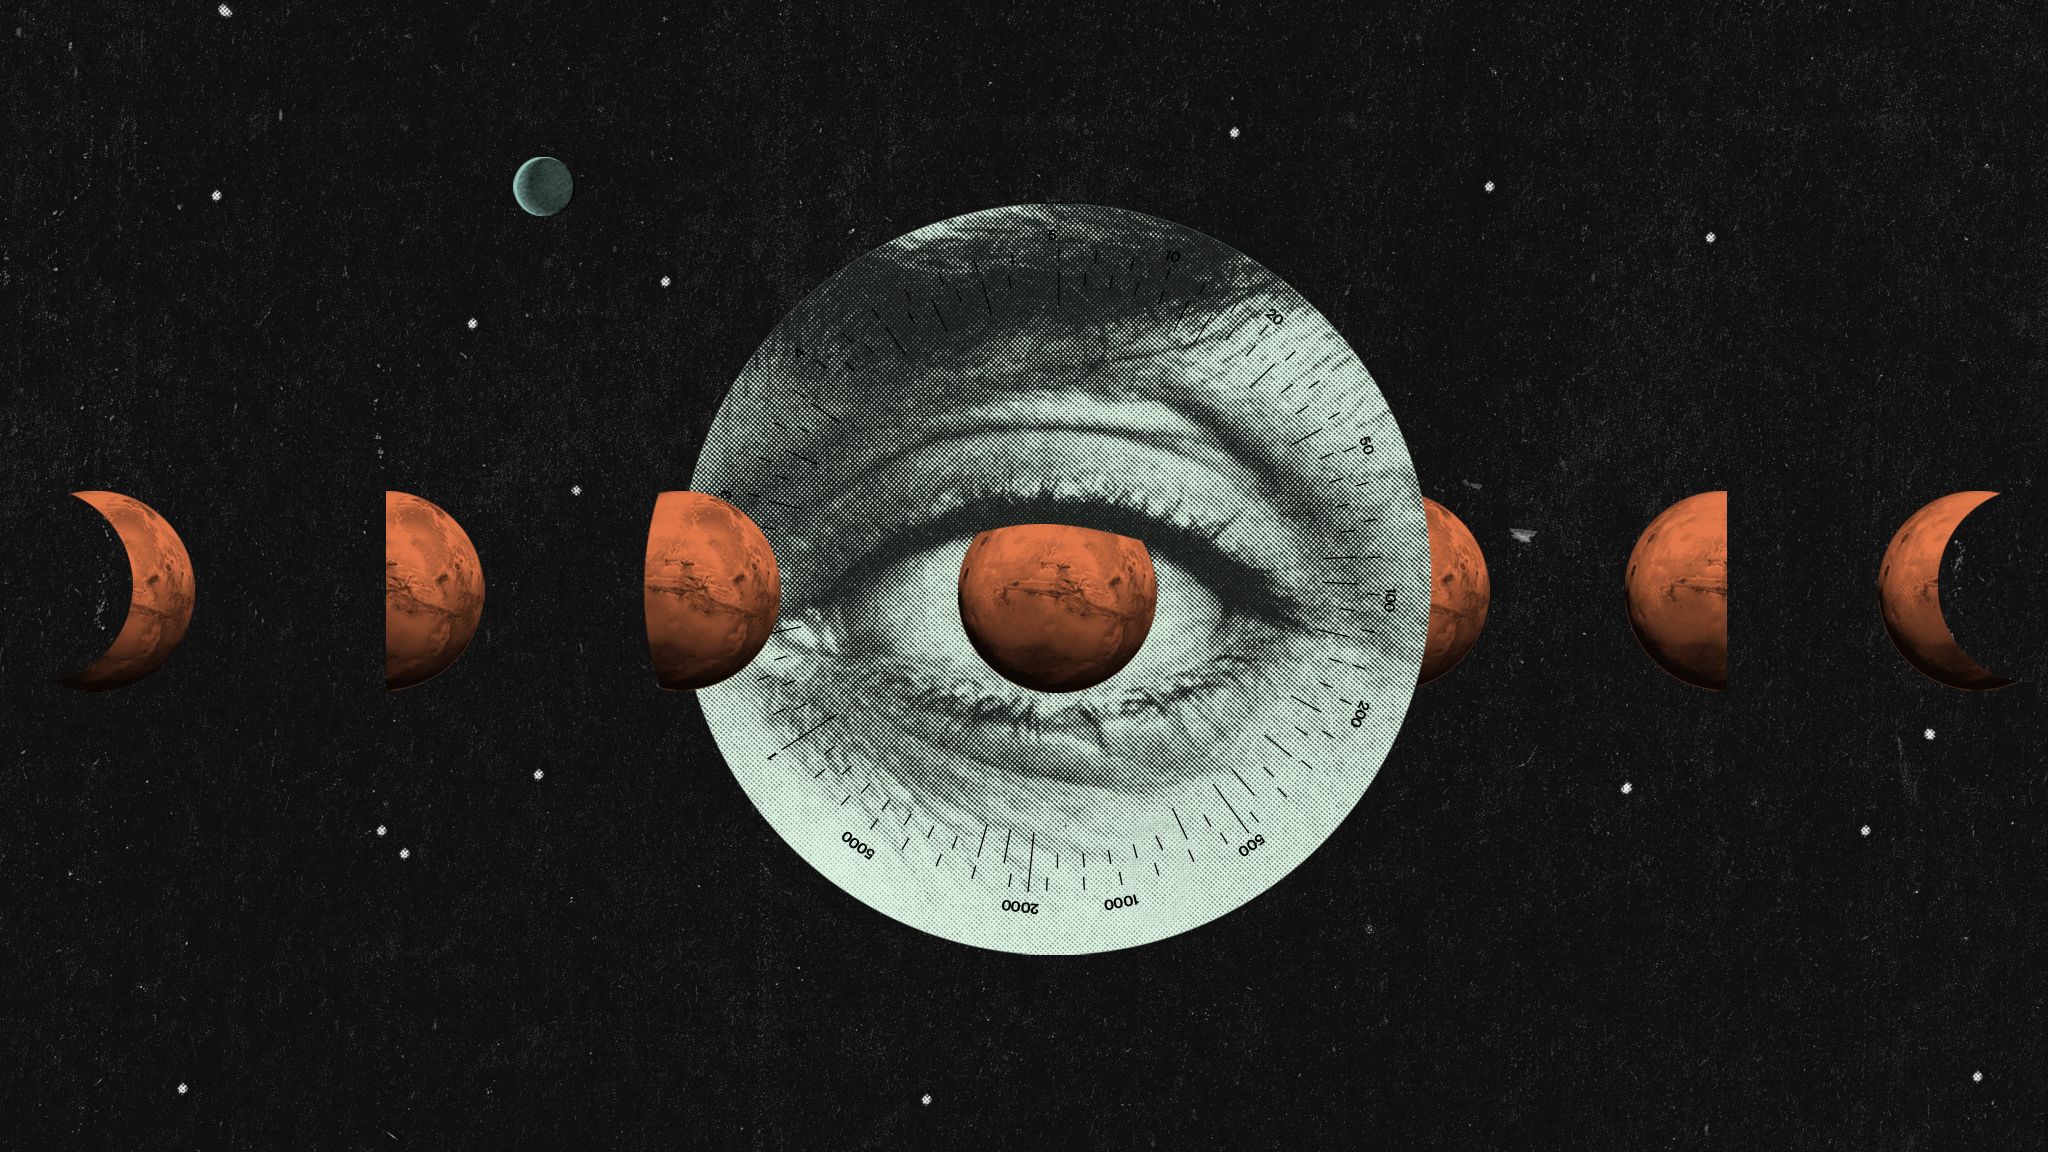 An eye with planets for pupils and the phases of the moon around it - Mars